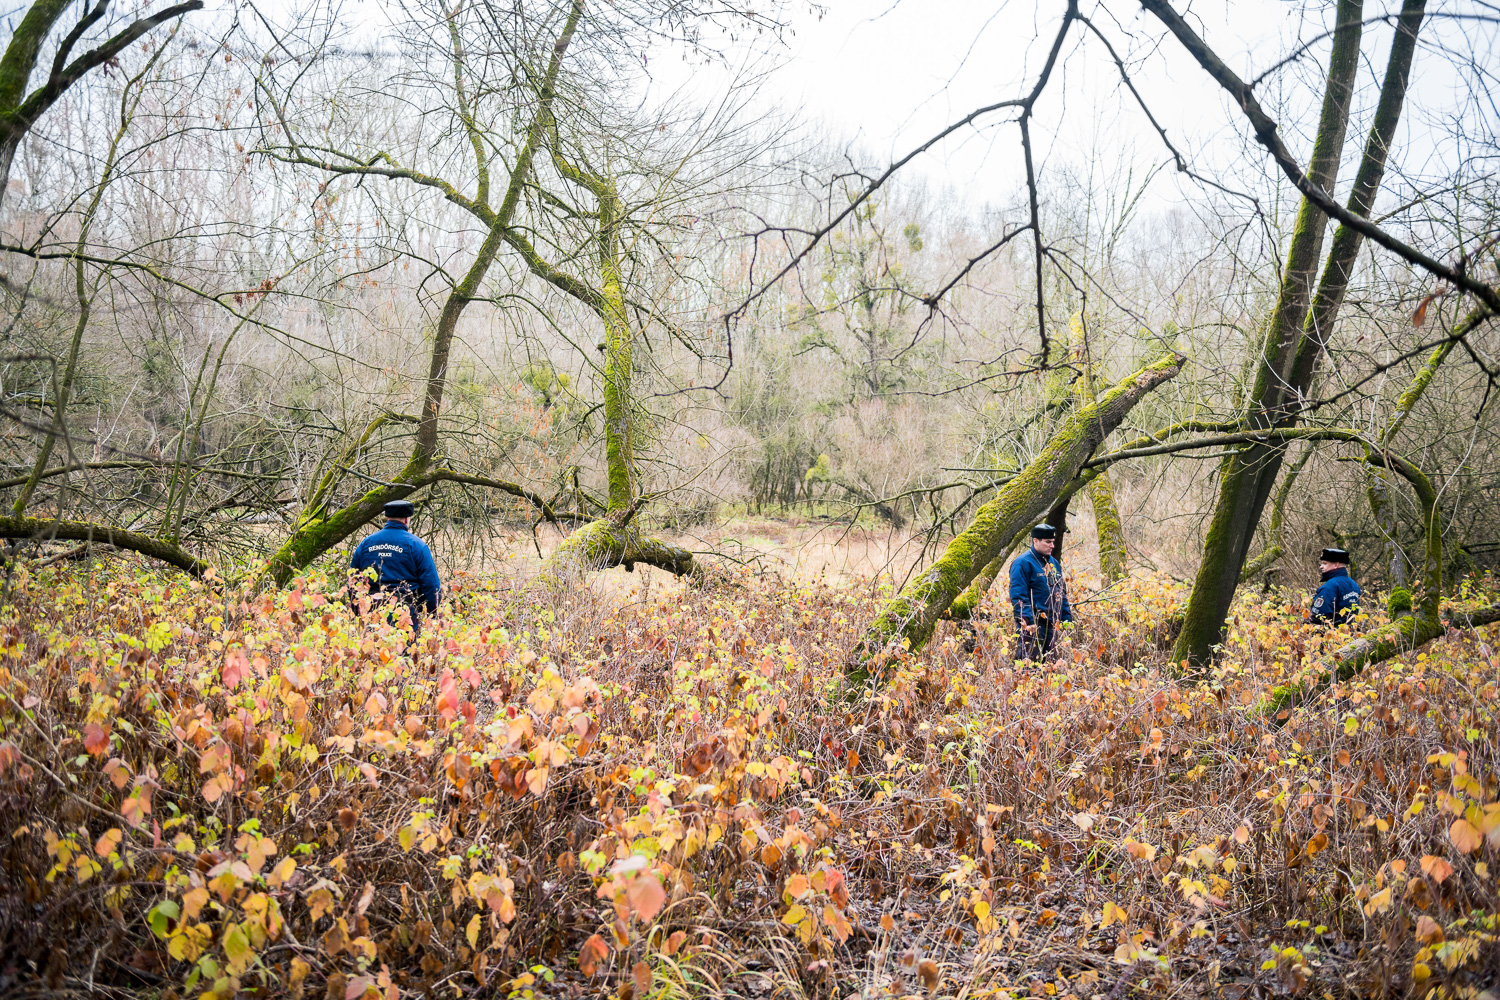  Policemen looking for signs of migrants near the barbed wire fence in the flood basin of Danube near Kölked, Hungary 9 December 2017. The fence was constructed in the middle of the European migration crisis in 2015, with the aim to ensure border sec